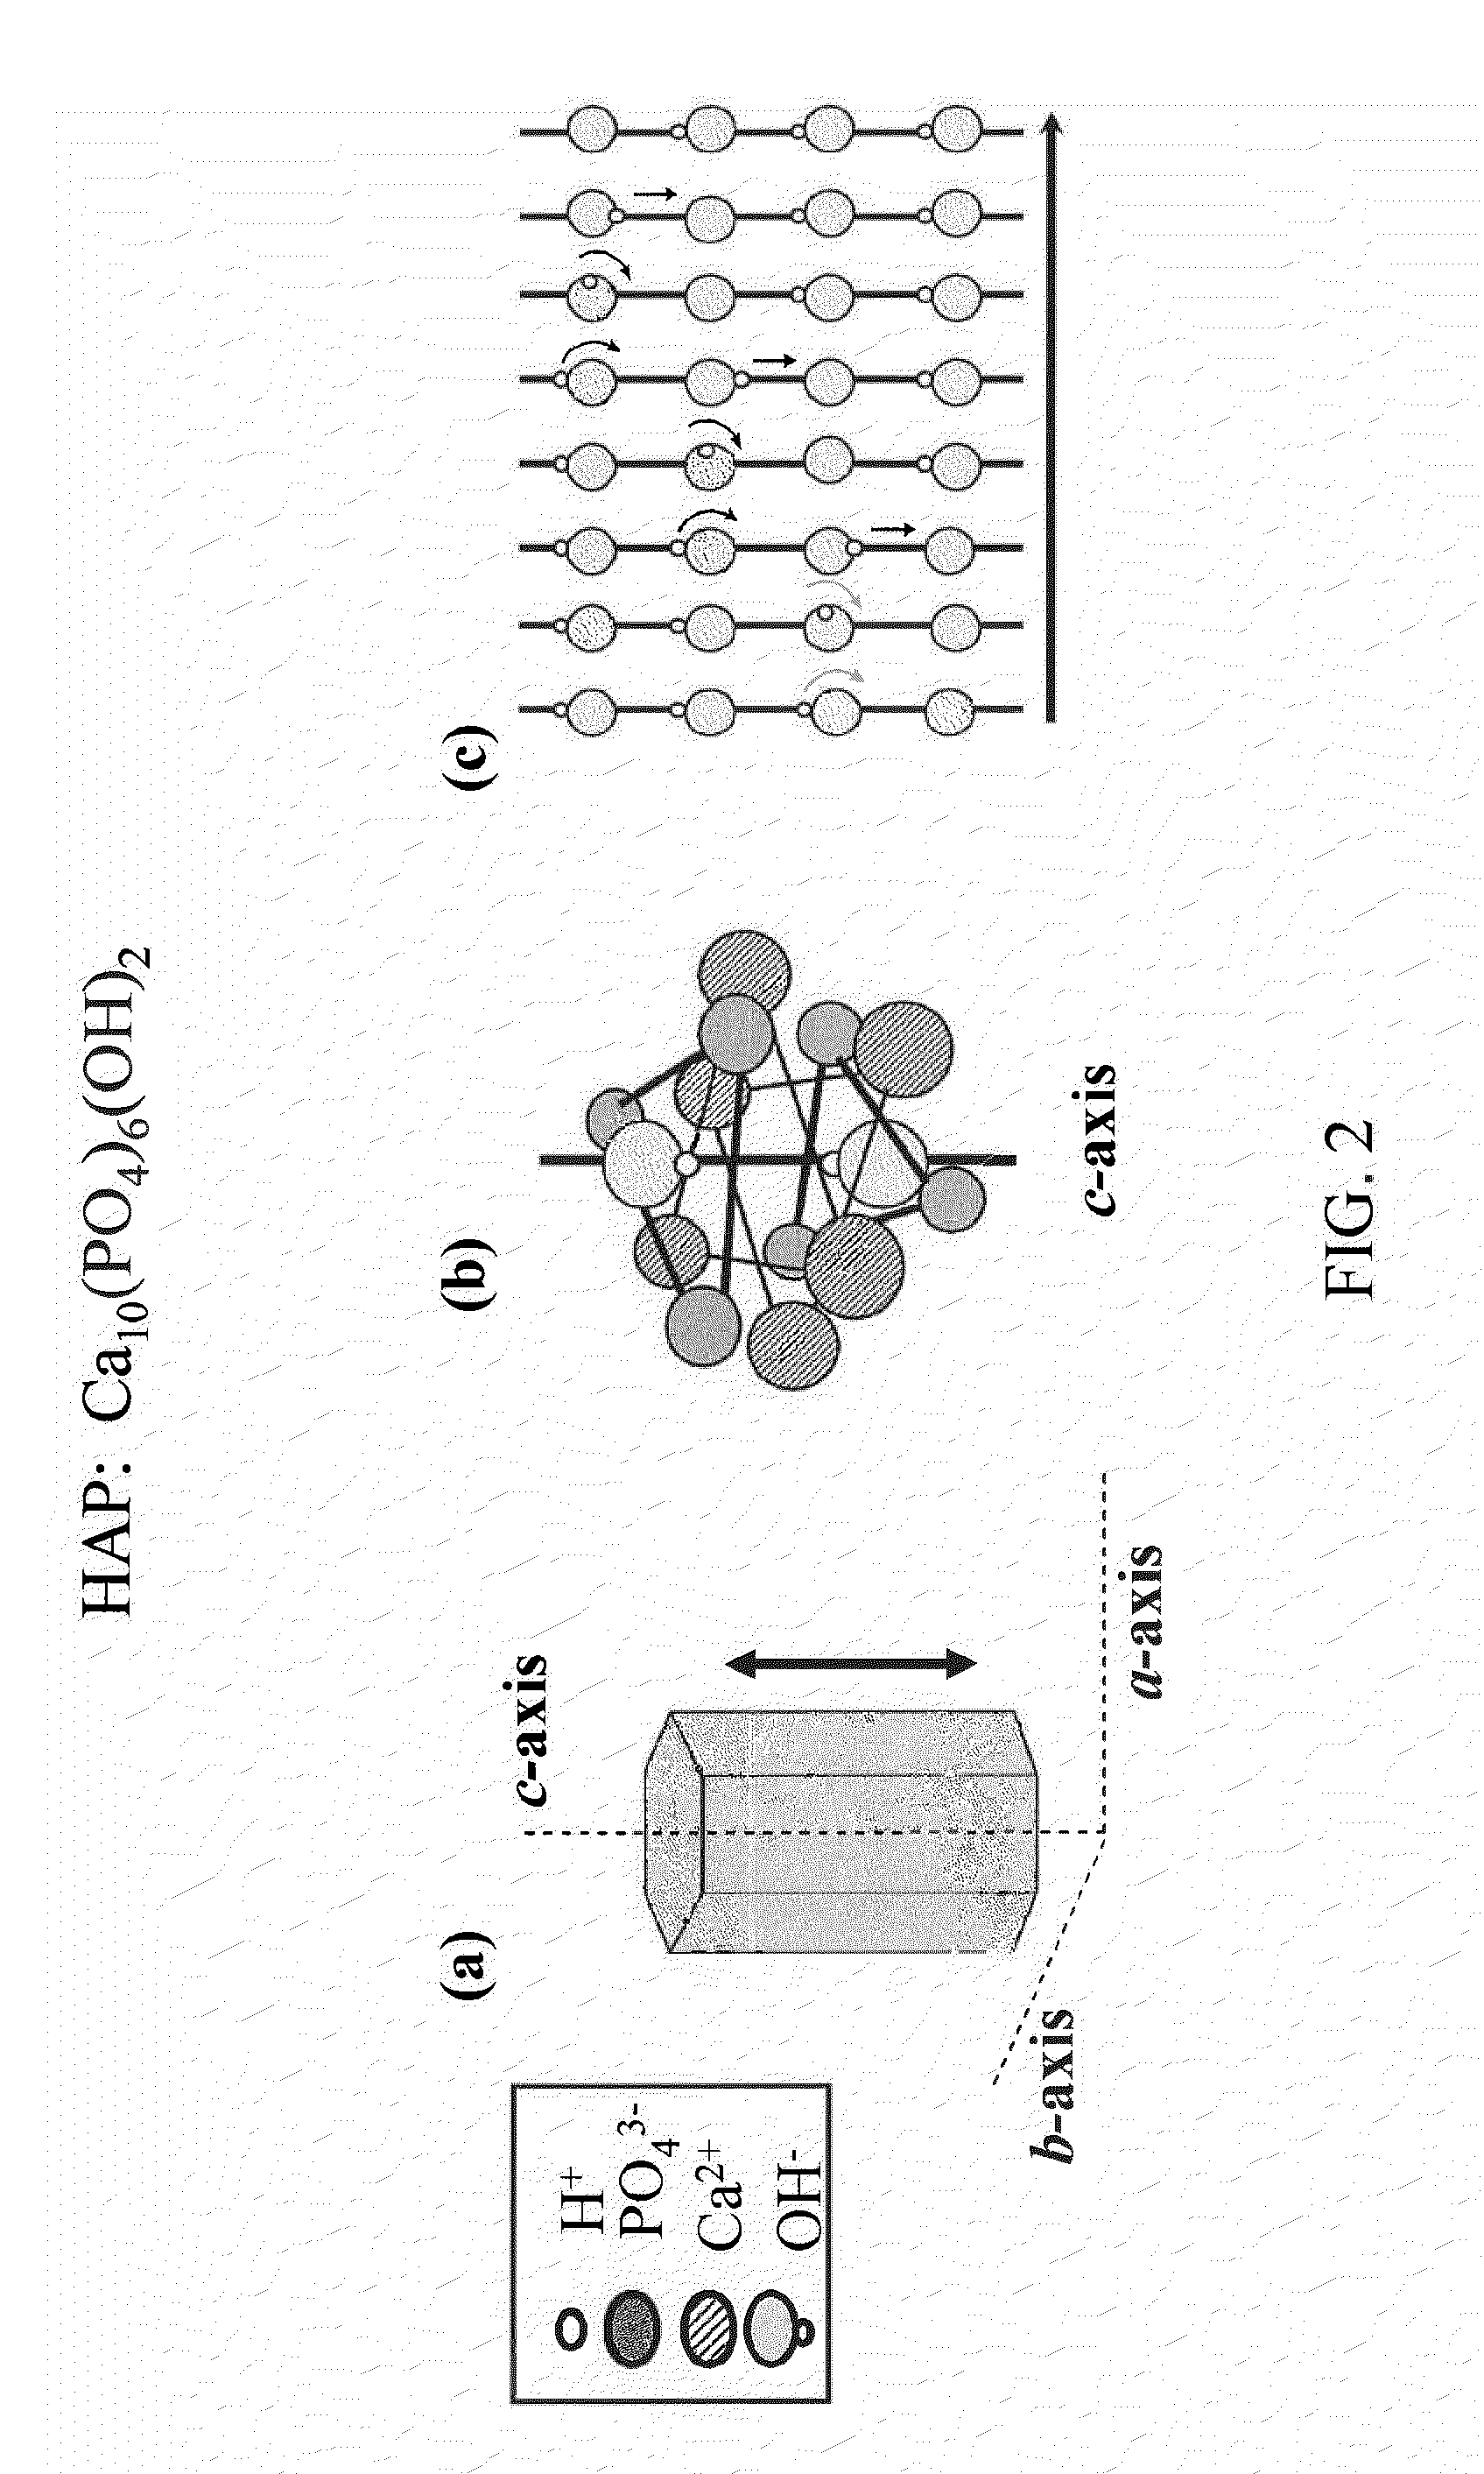 Ion-Conducting Ceramic Apparatus, Method, Fabrication, and Applications